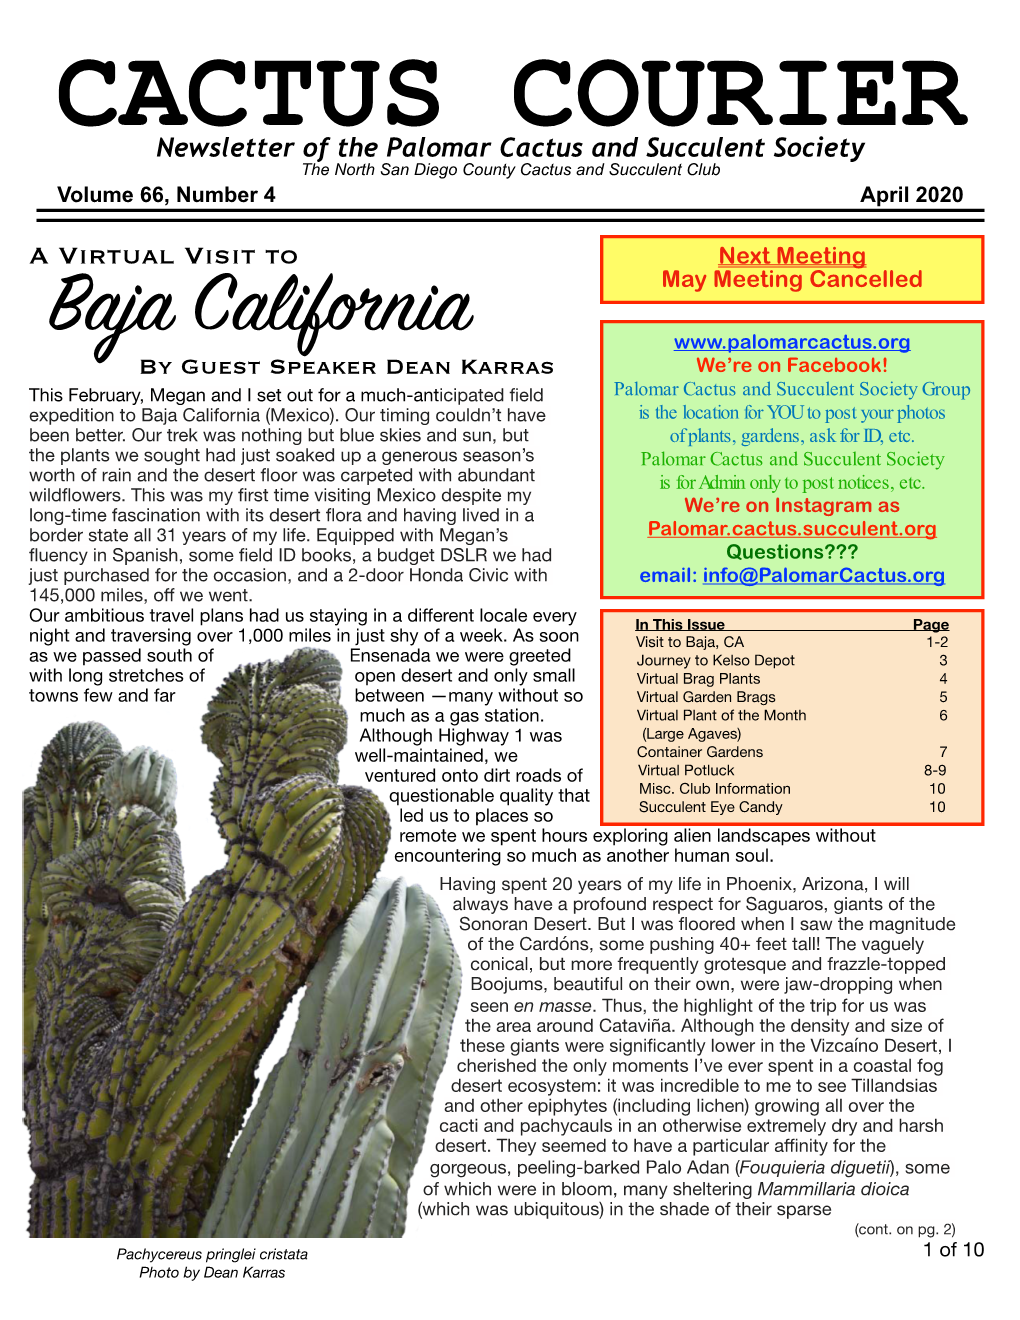 CACTUS COURIER Newsletter of the Palomar Cactus and Succulent Society the North San Diego County Cactus and Succulent Club Volume 66, Number 4 April 2020